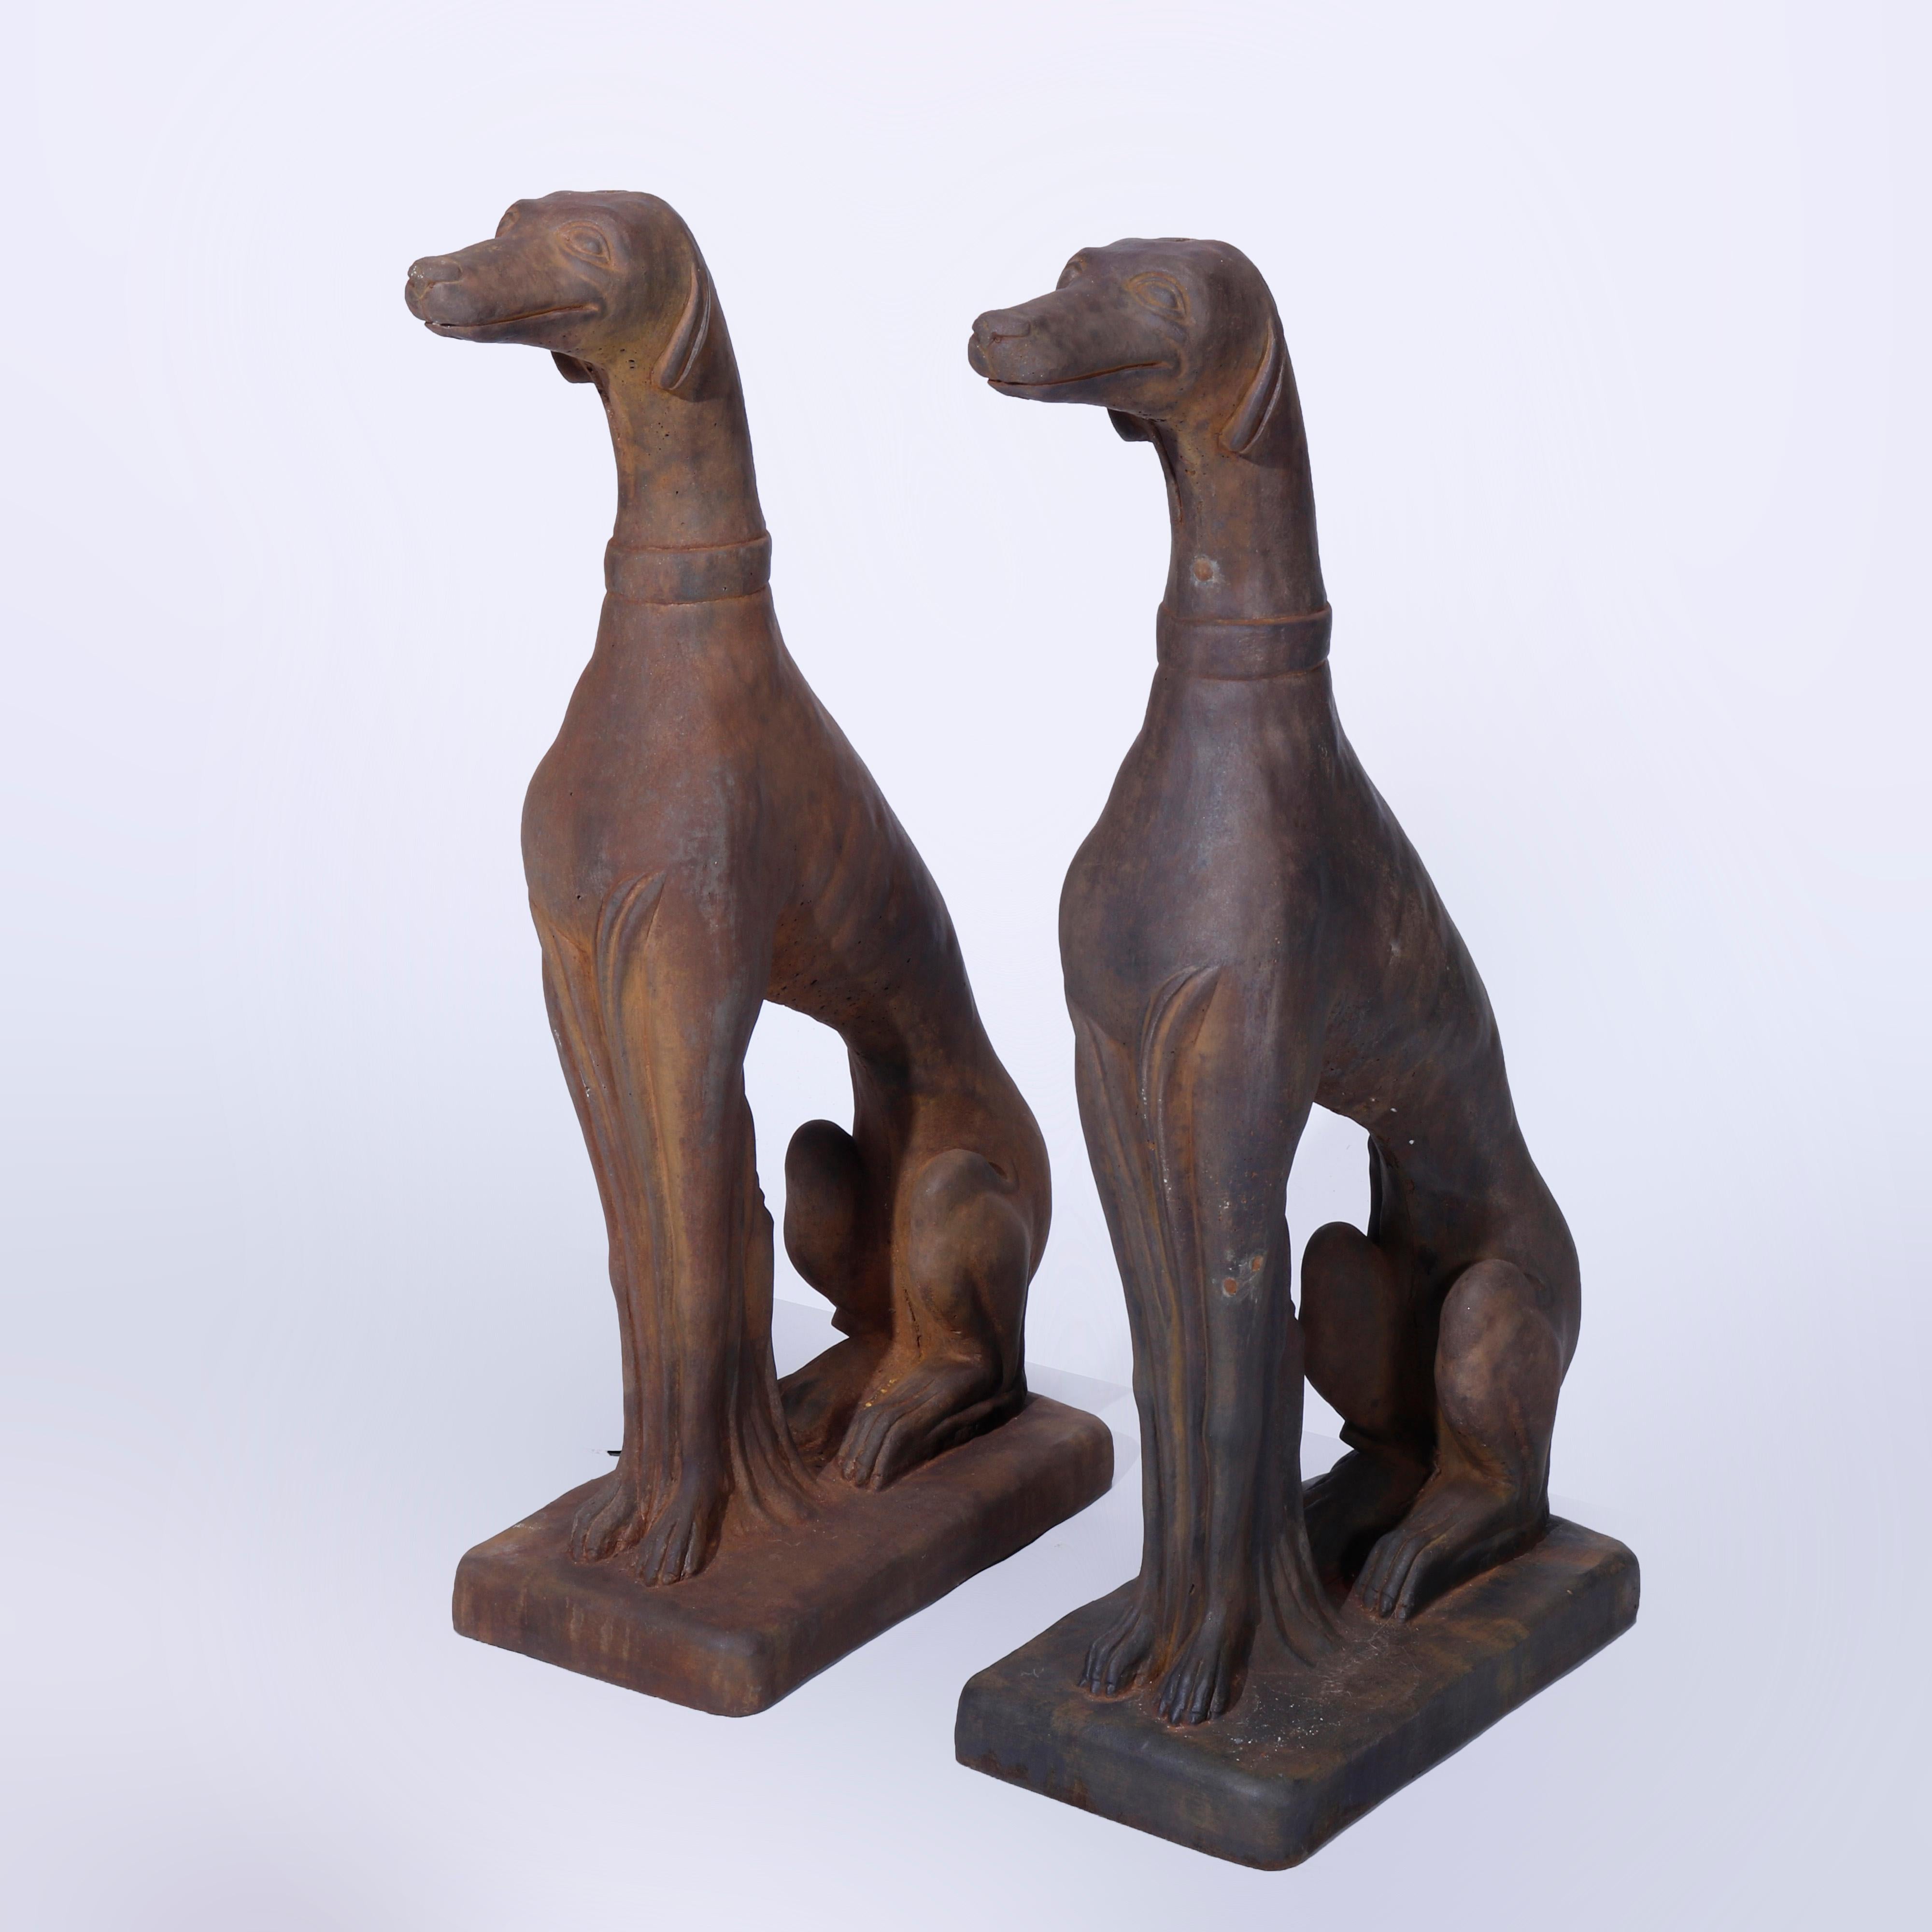 A pair of figural garden sculptures offer bronzed cast hard stone life size Whippets (dogs) in the seated position, 21st century.

Measures - 30'' H x 8'' W x 19''L.
 
Catalogue Note: Ask about DISCOUNTED DELIVERY RATES available to most regions